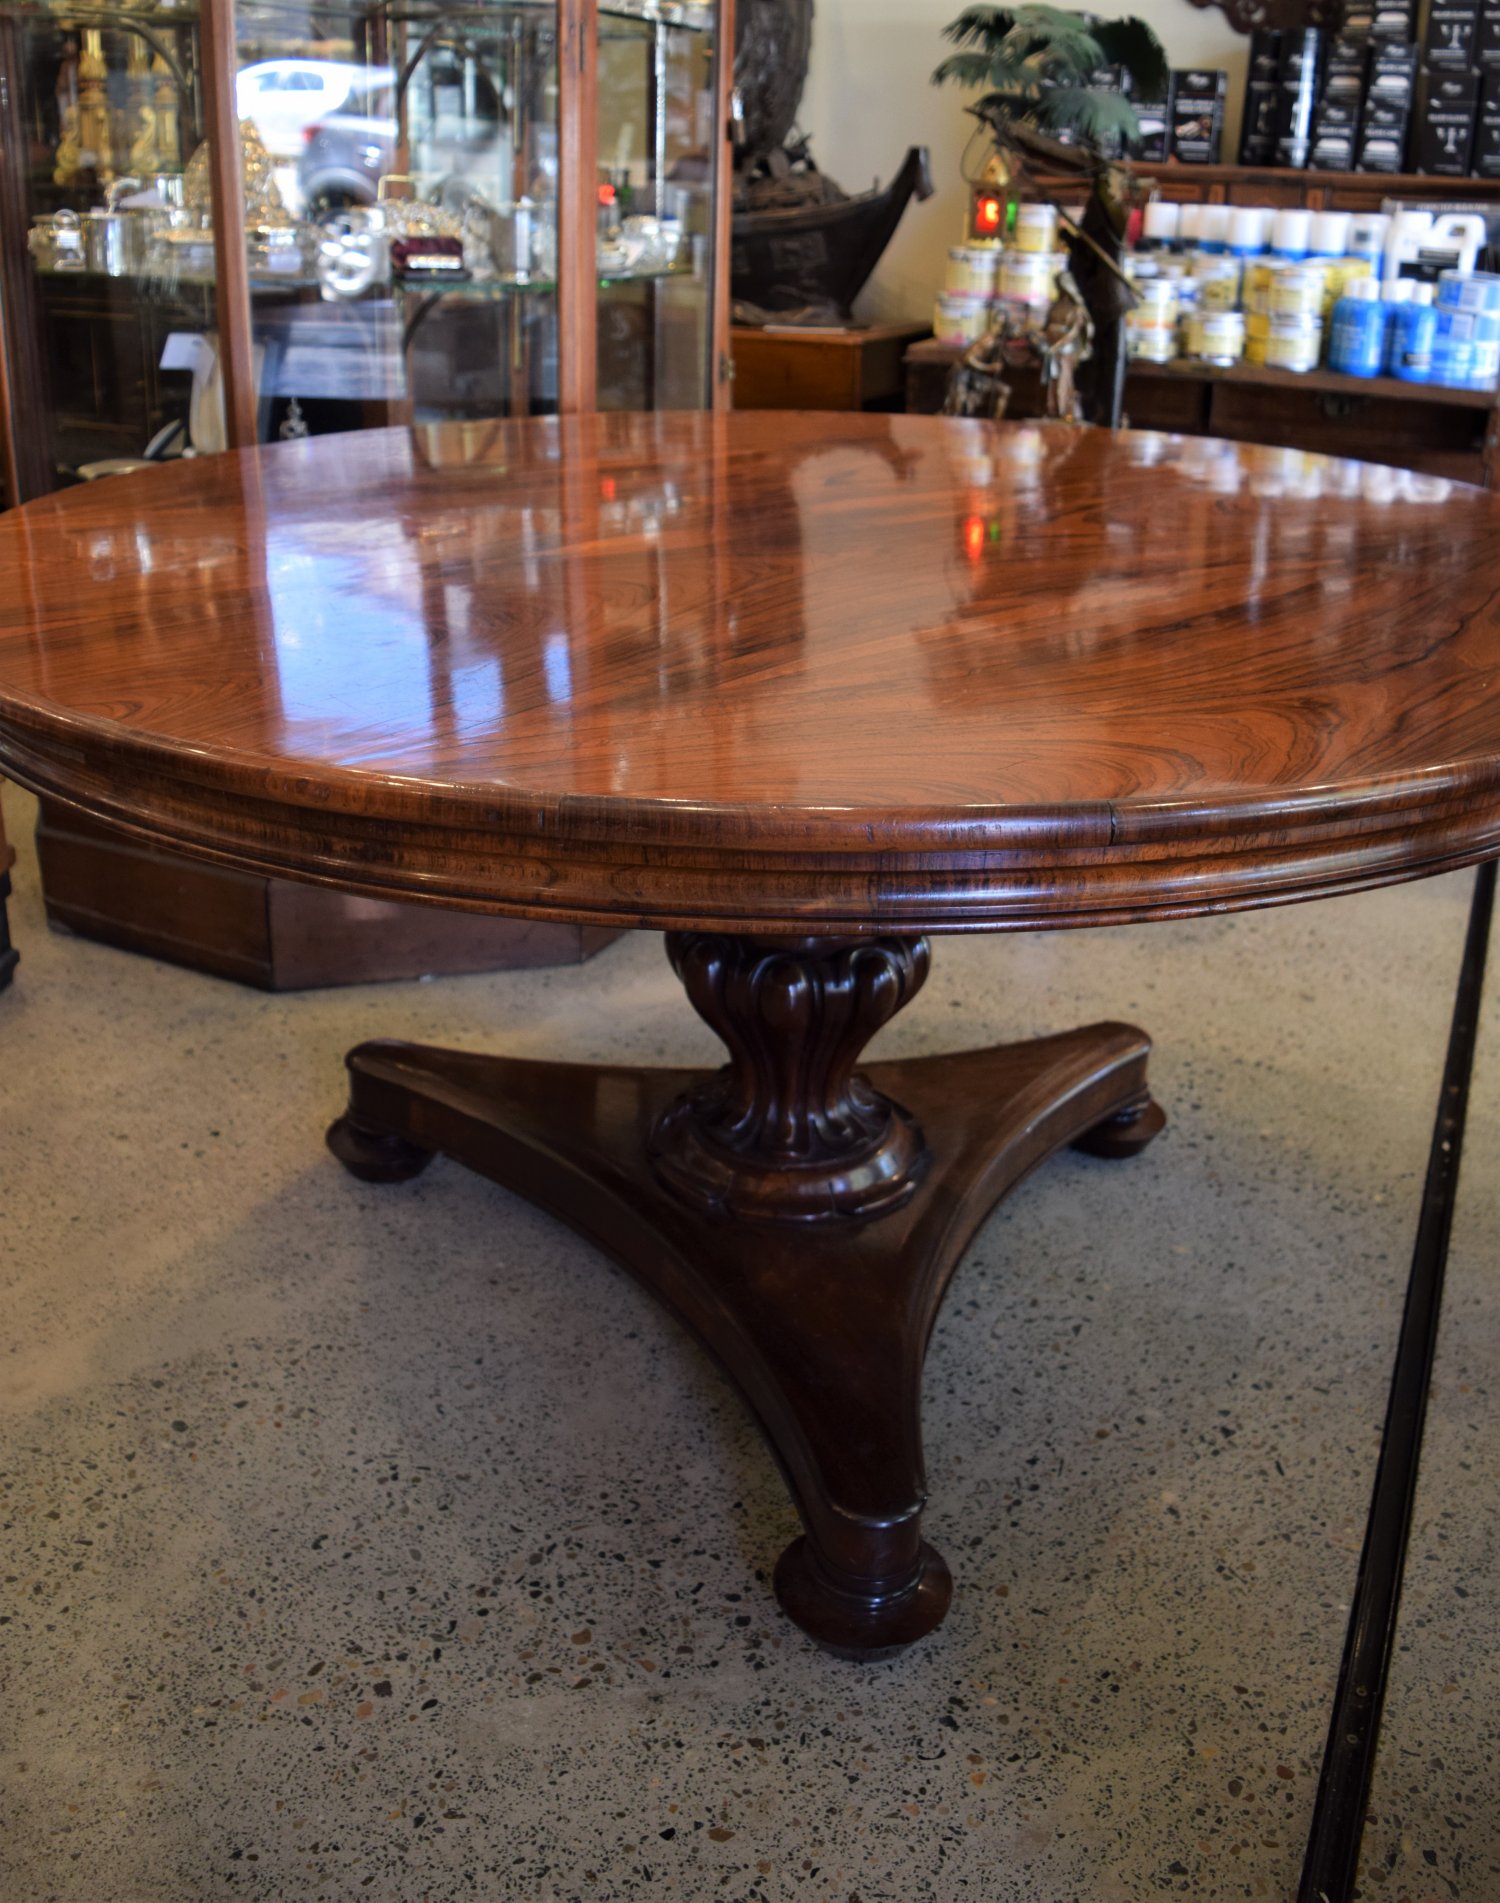 William IV Early Victorian Tilt-top Table